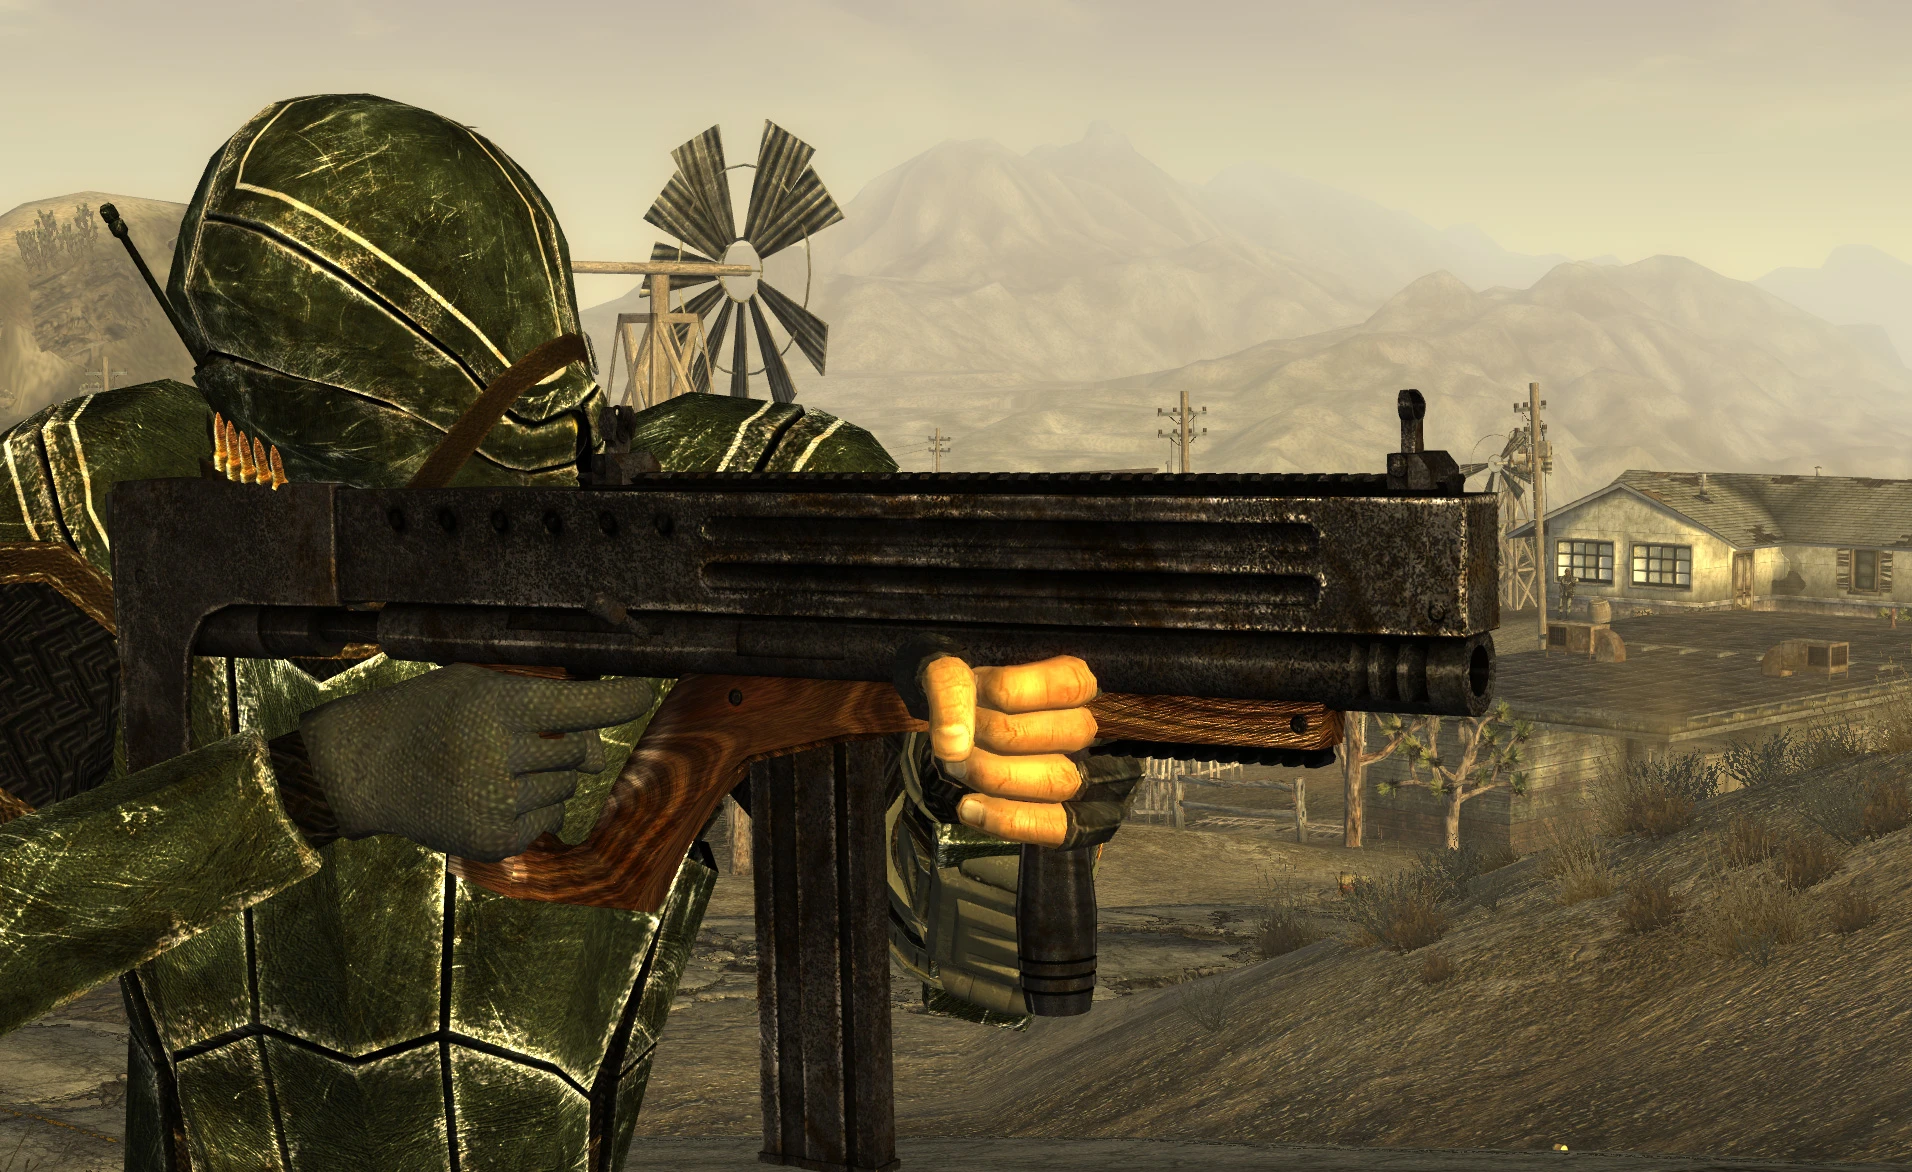 50 Caliber SMG Mod Release At Fallout New Vegas Mods And Community.